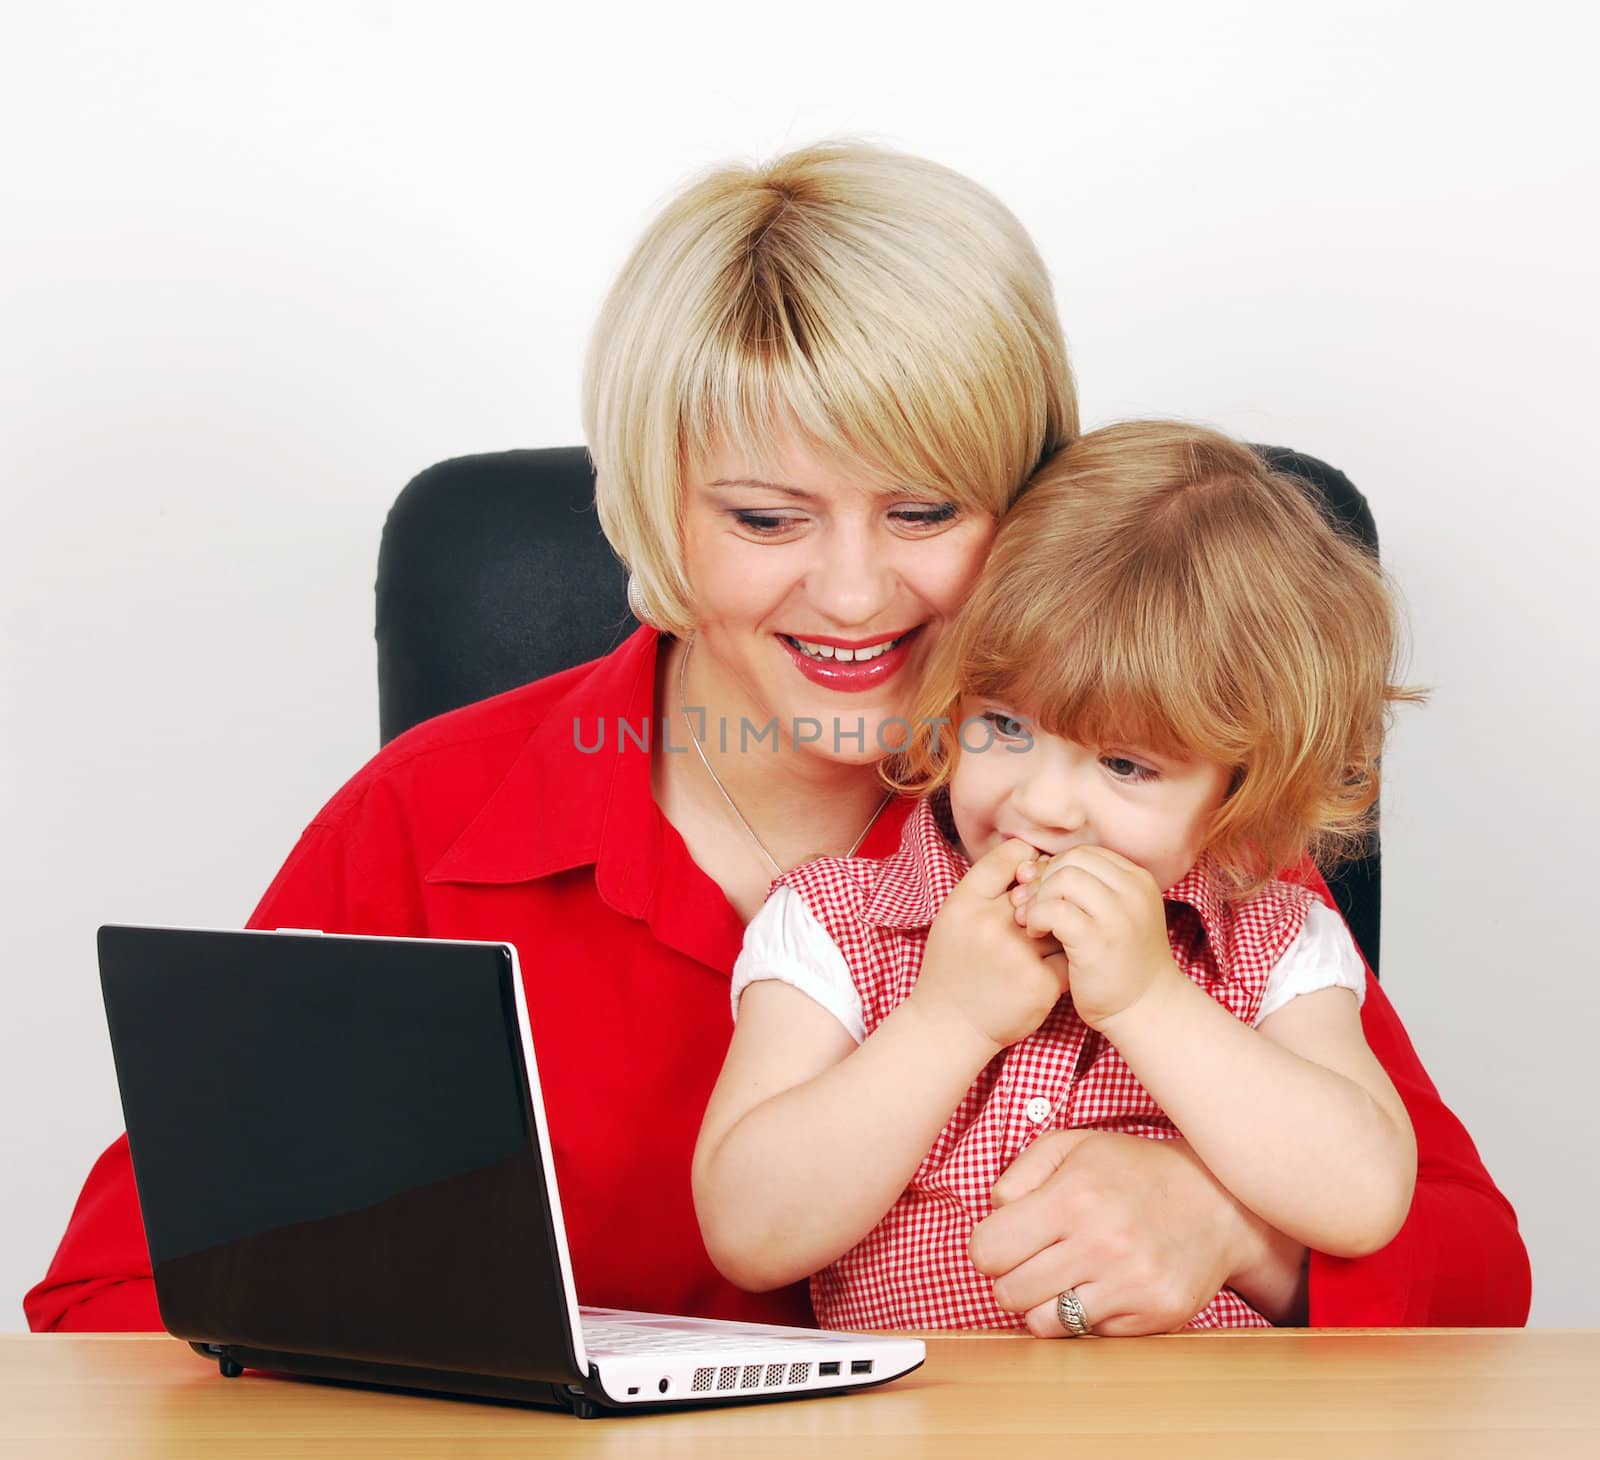 Daughter and mother with laptop studio shot by goce